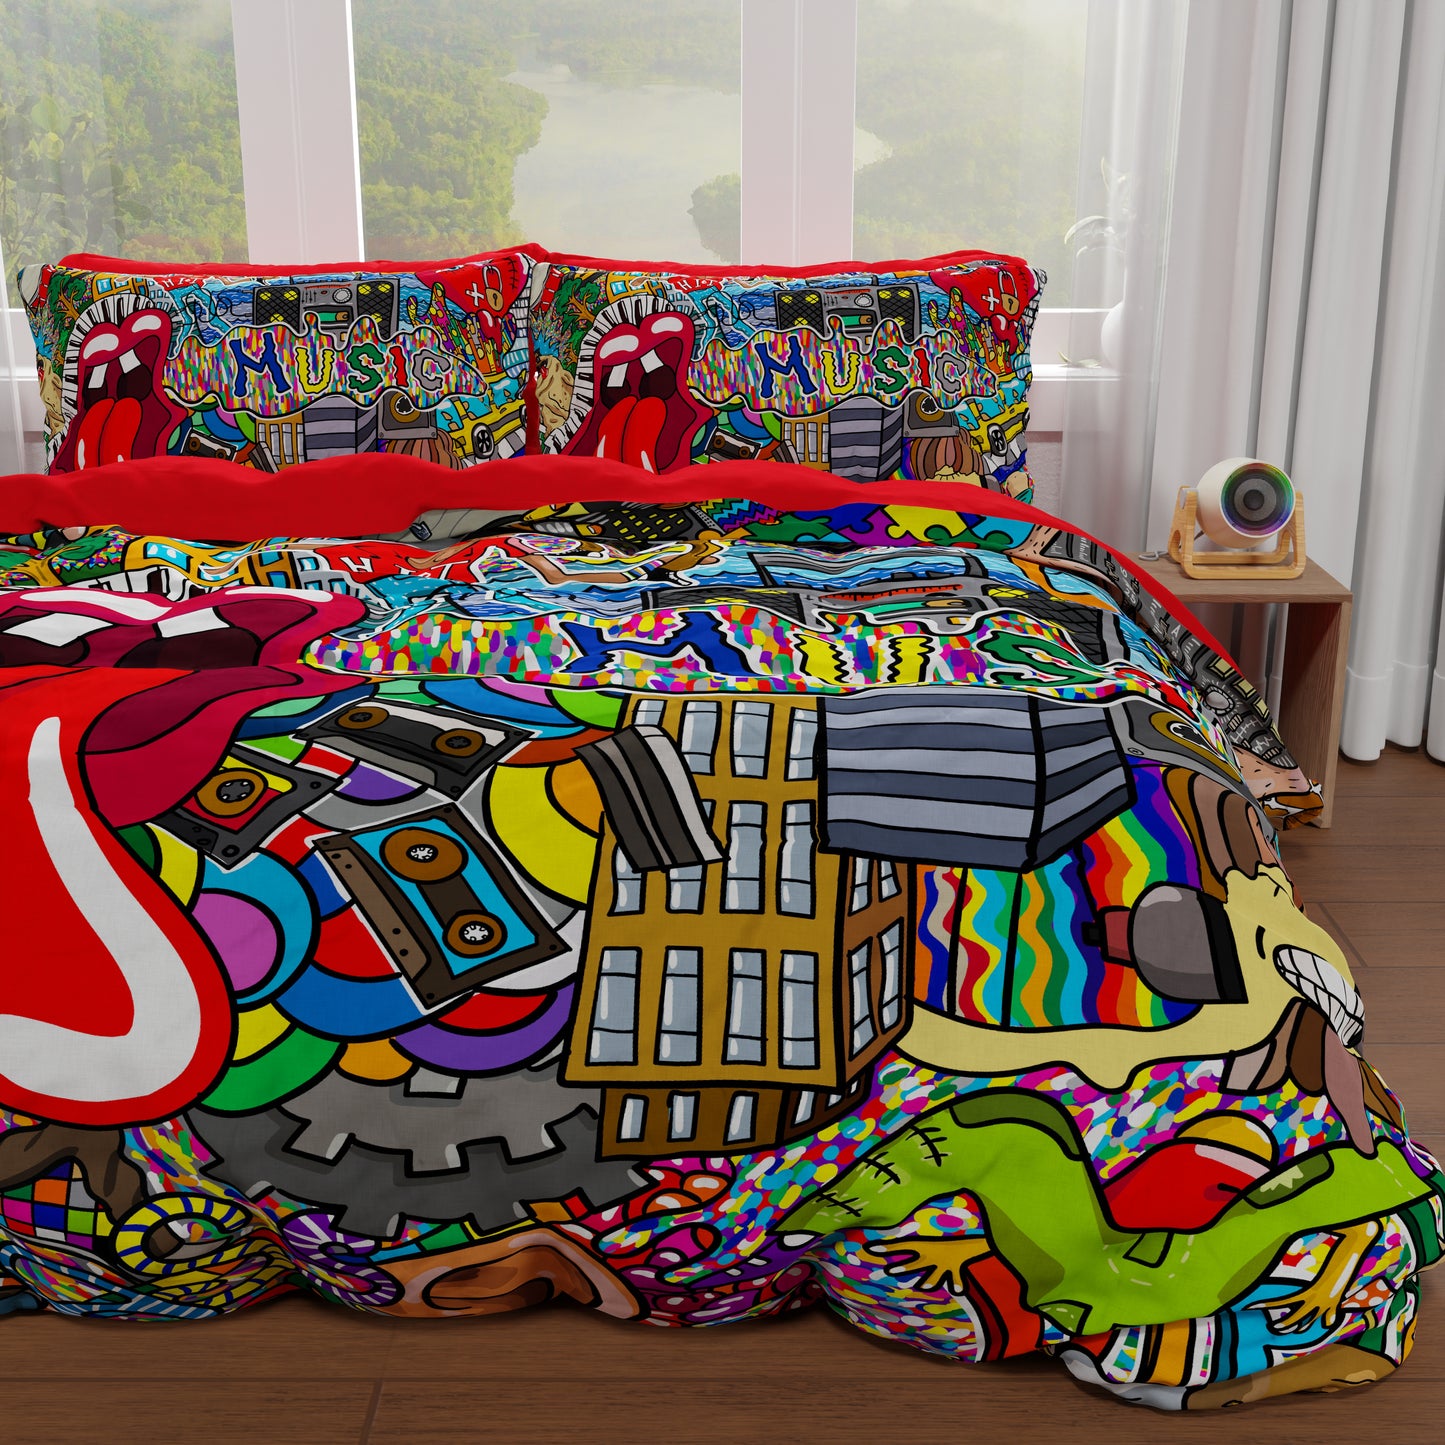 Duvet cover for double, single, one and a half square, murals